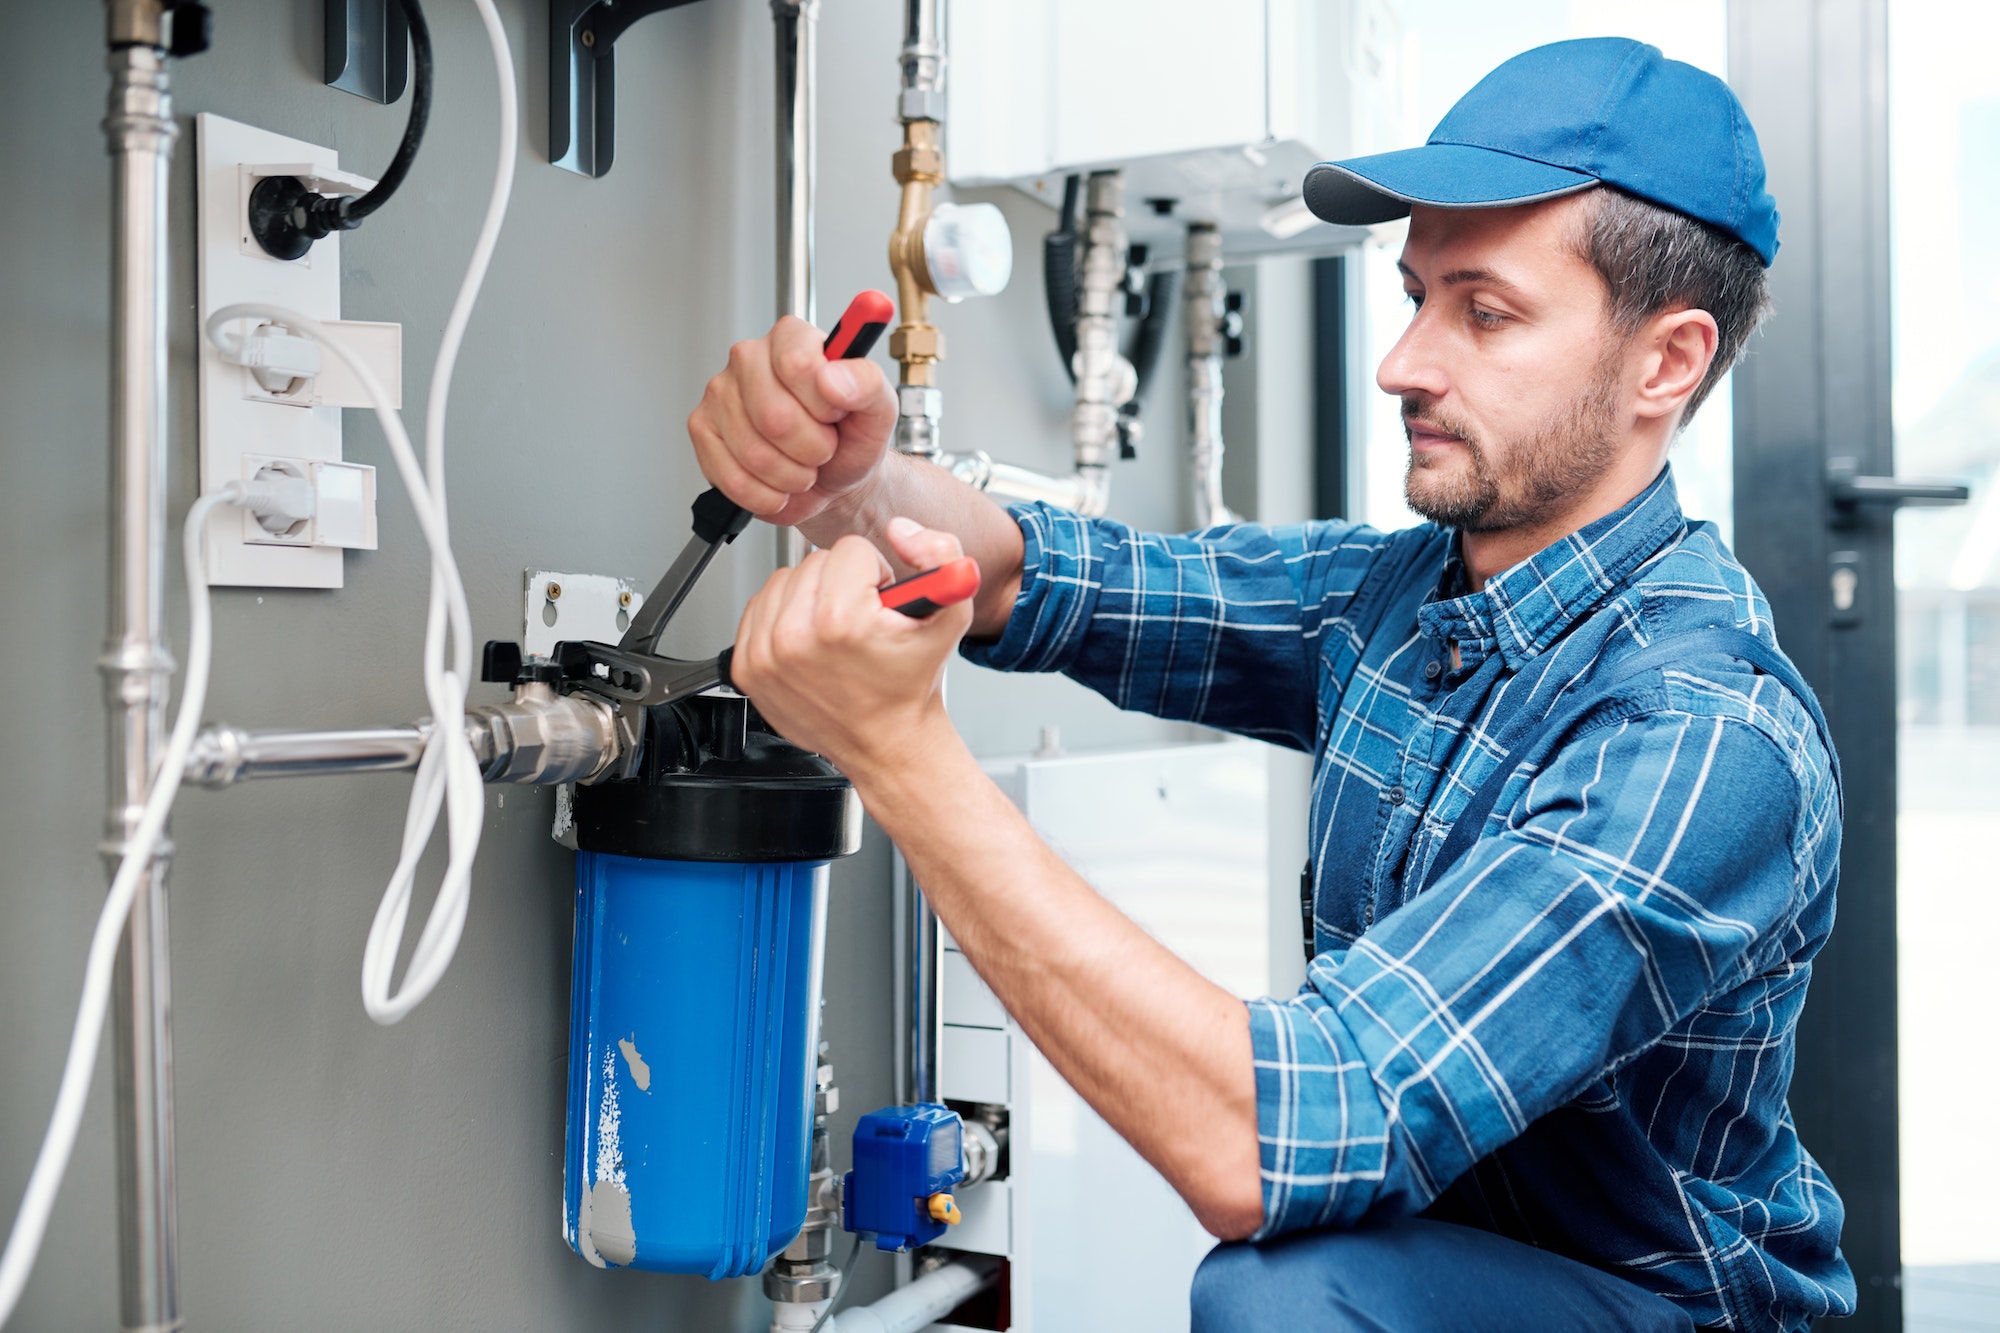 Young plumber or technician installing or repairing system of water filtration